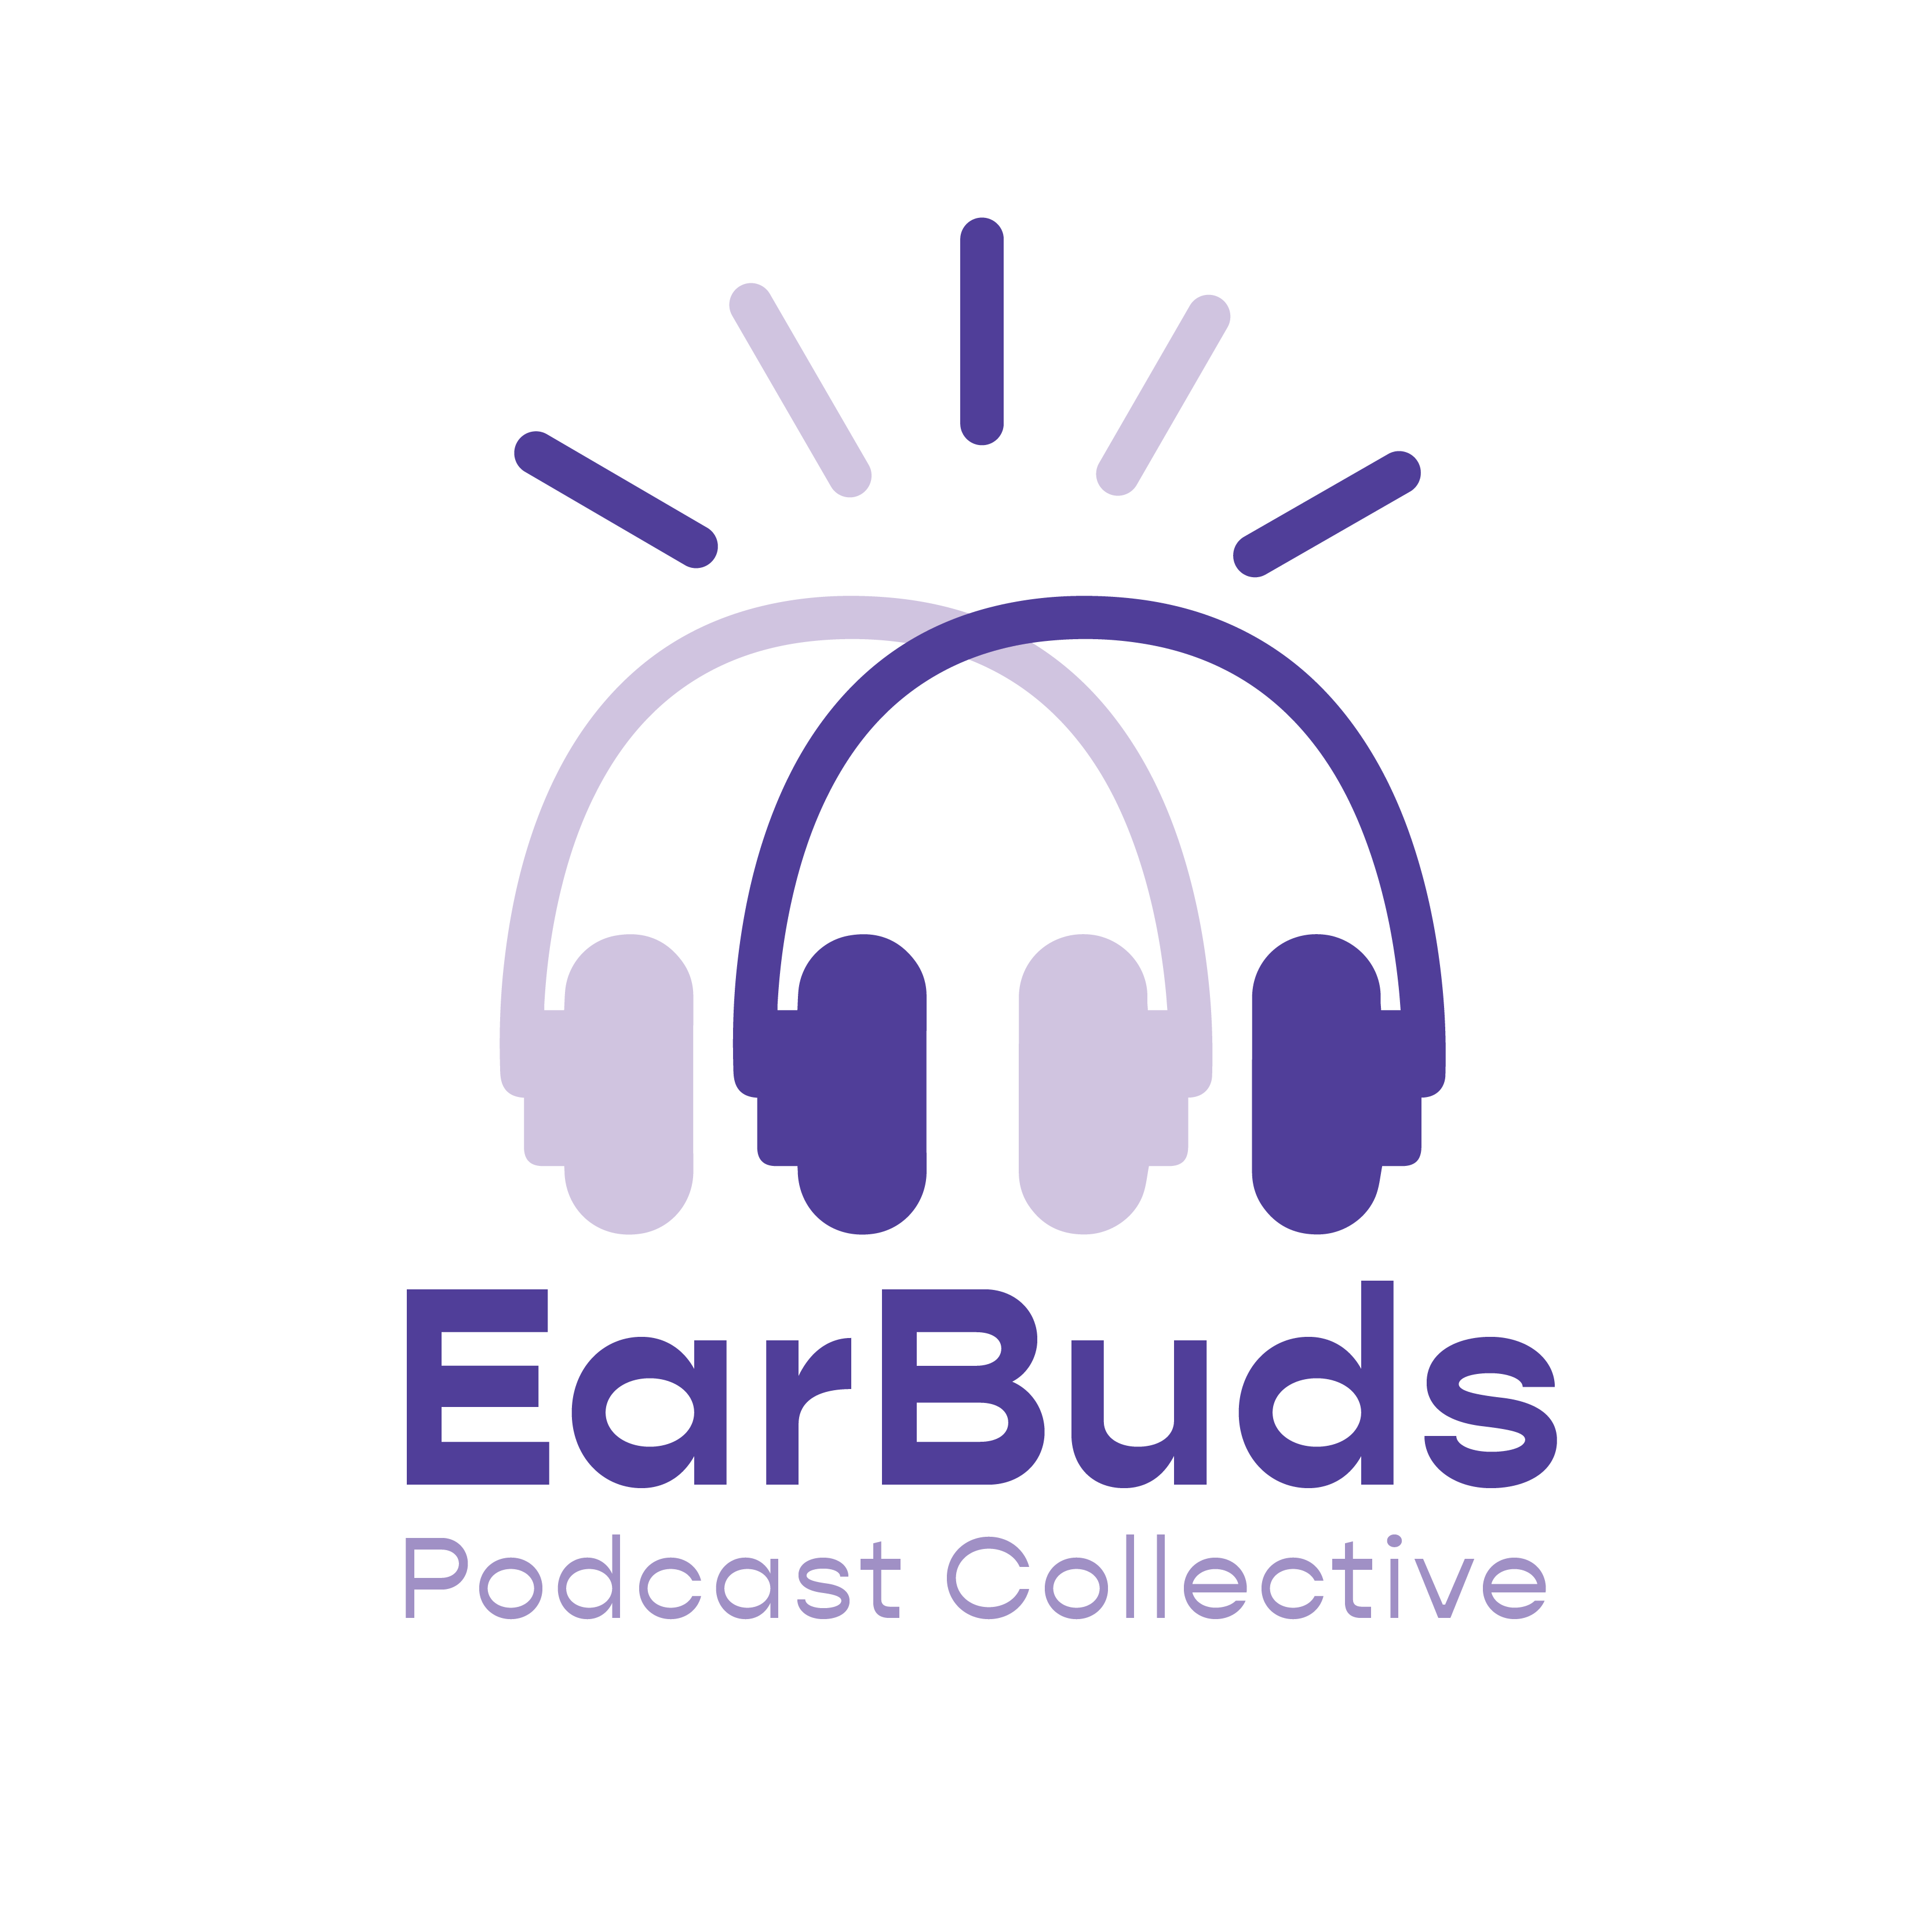 Artwork for EarBuds Podcast Collective